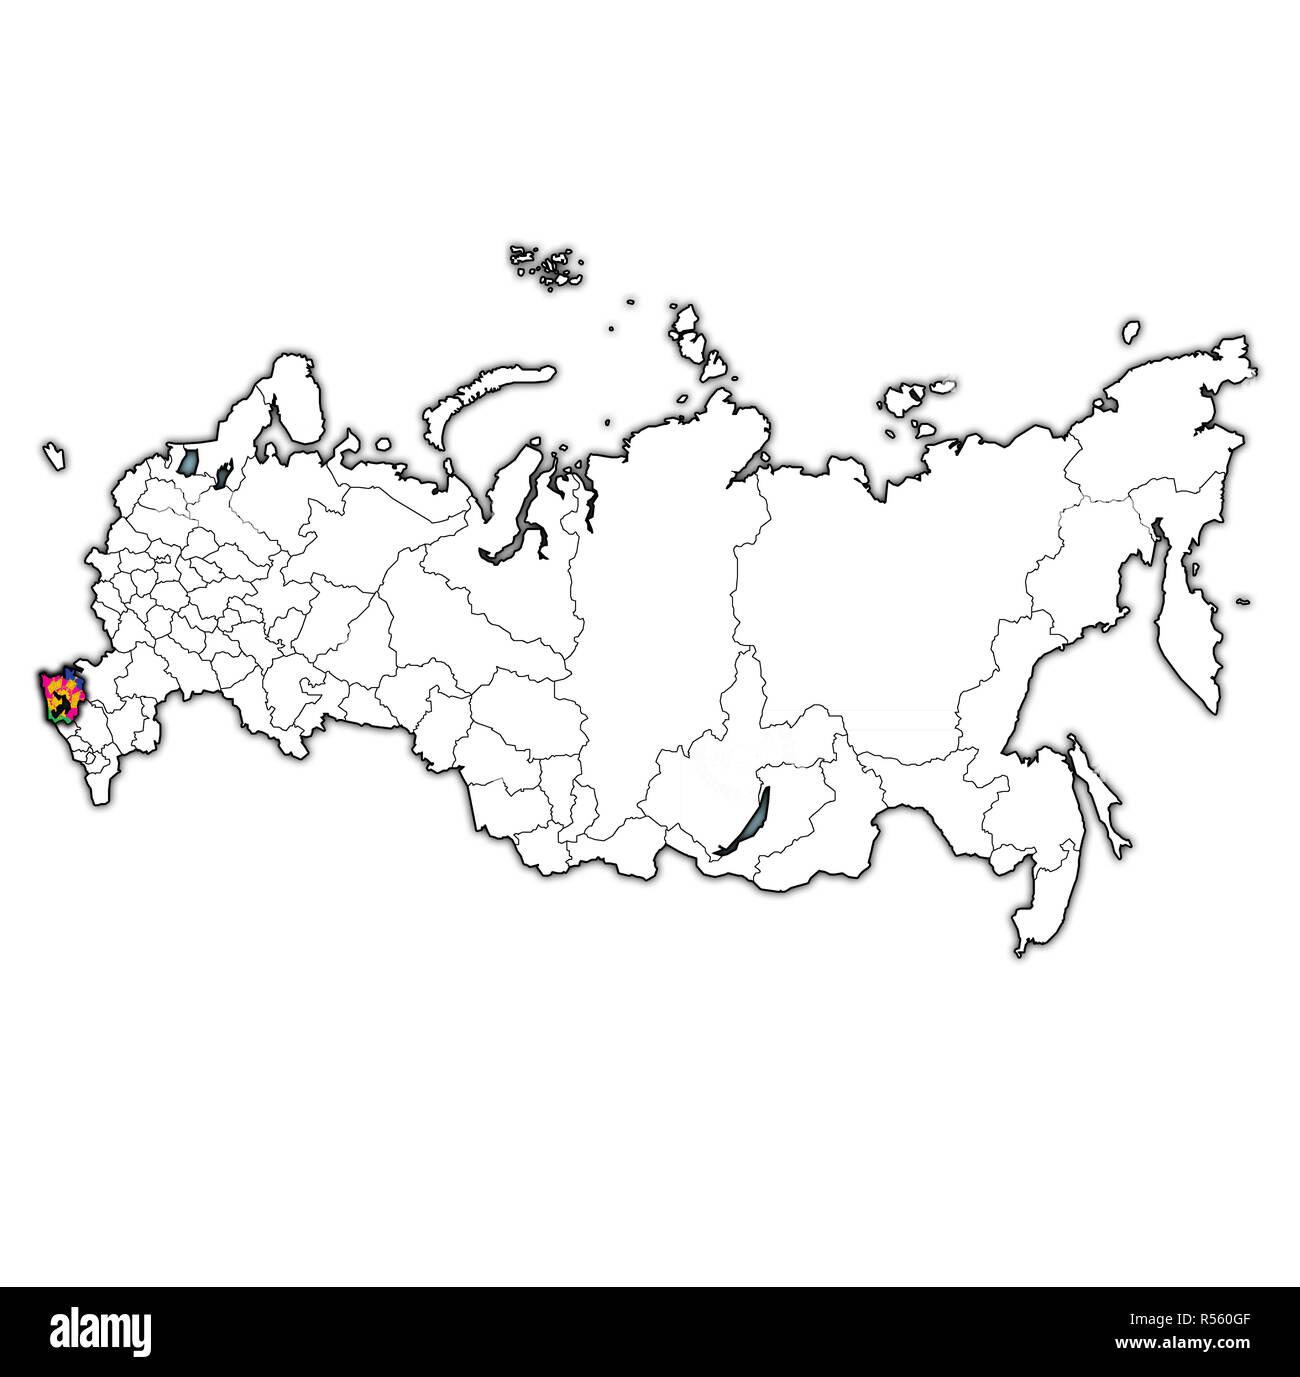 emblem of krasnodar krai on map with administrative divisions and borders of russia Stock Photo